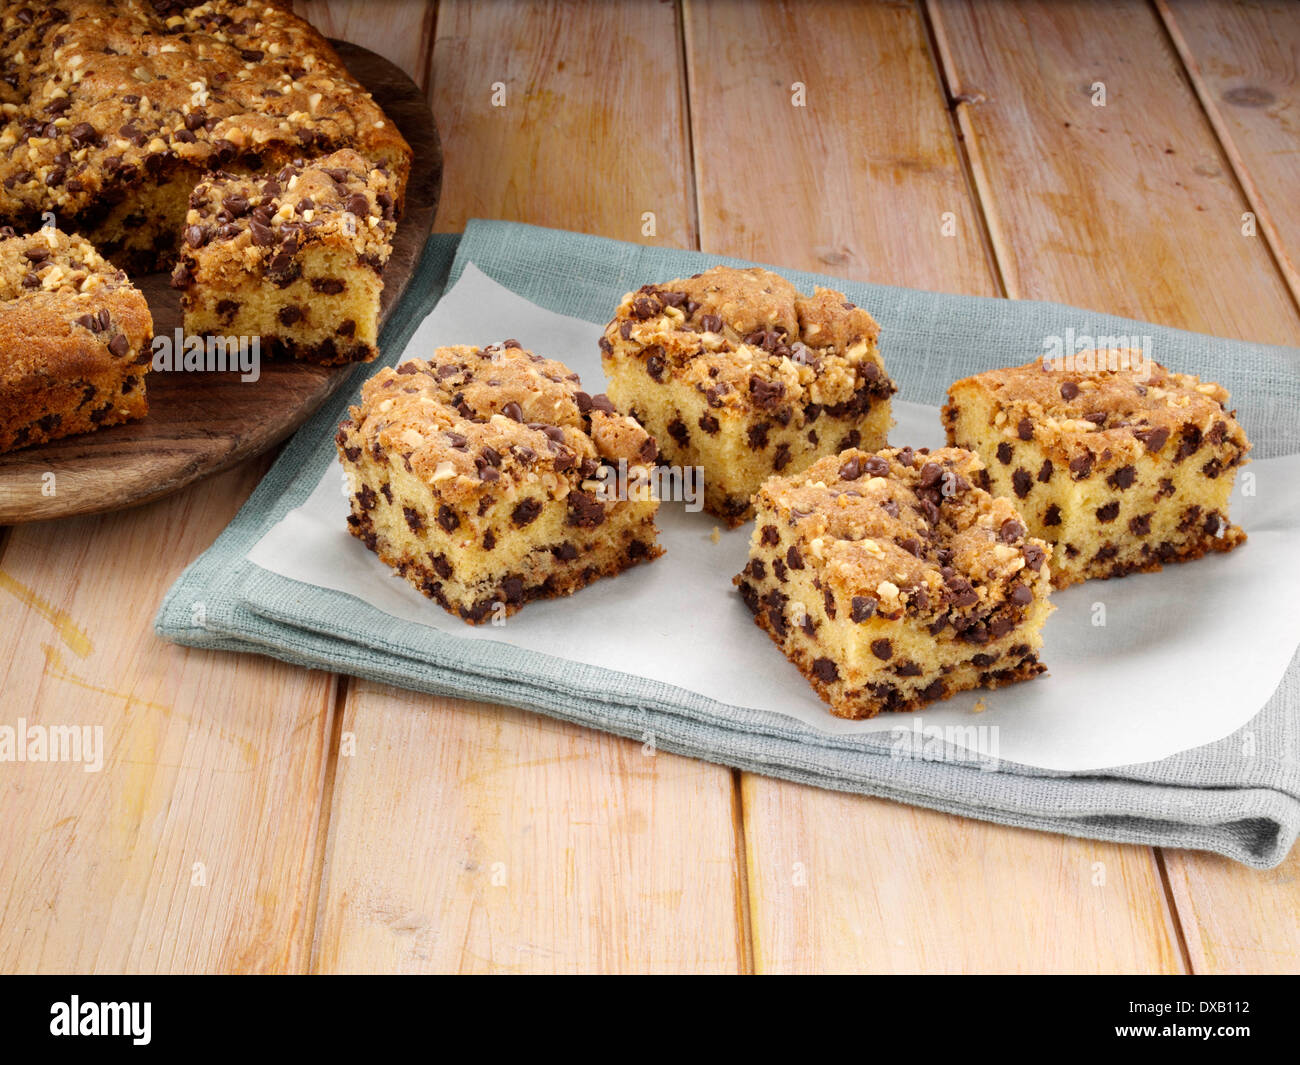 Chocolate chip crumb cake with crumble crunch topping Stock Photo